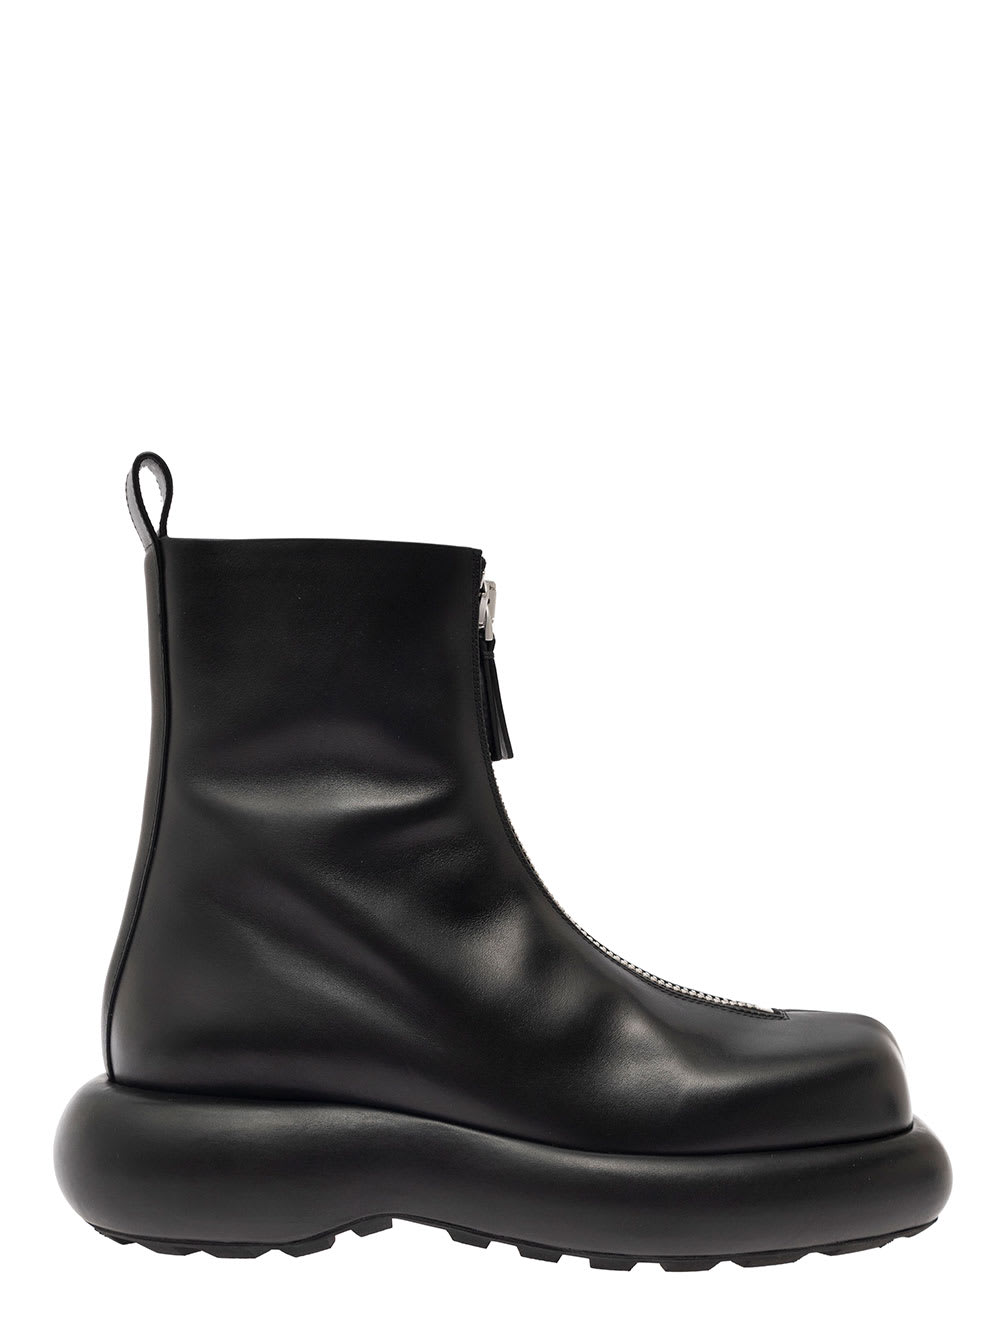 Strong Form Semi-shiny Calf Leather Trunk Ankle Boot